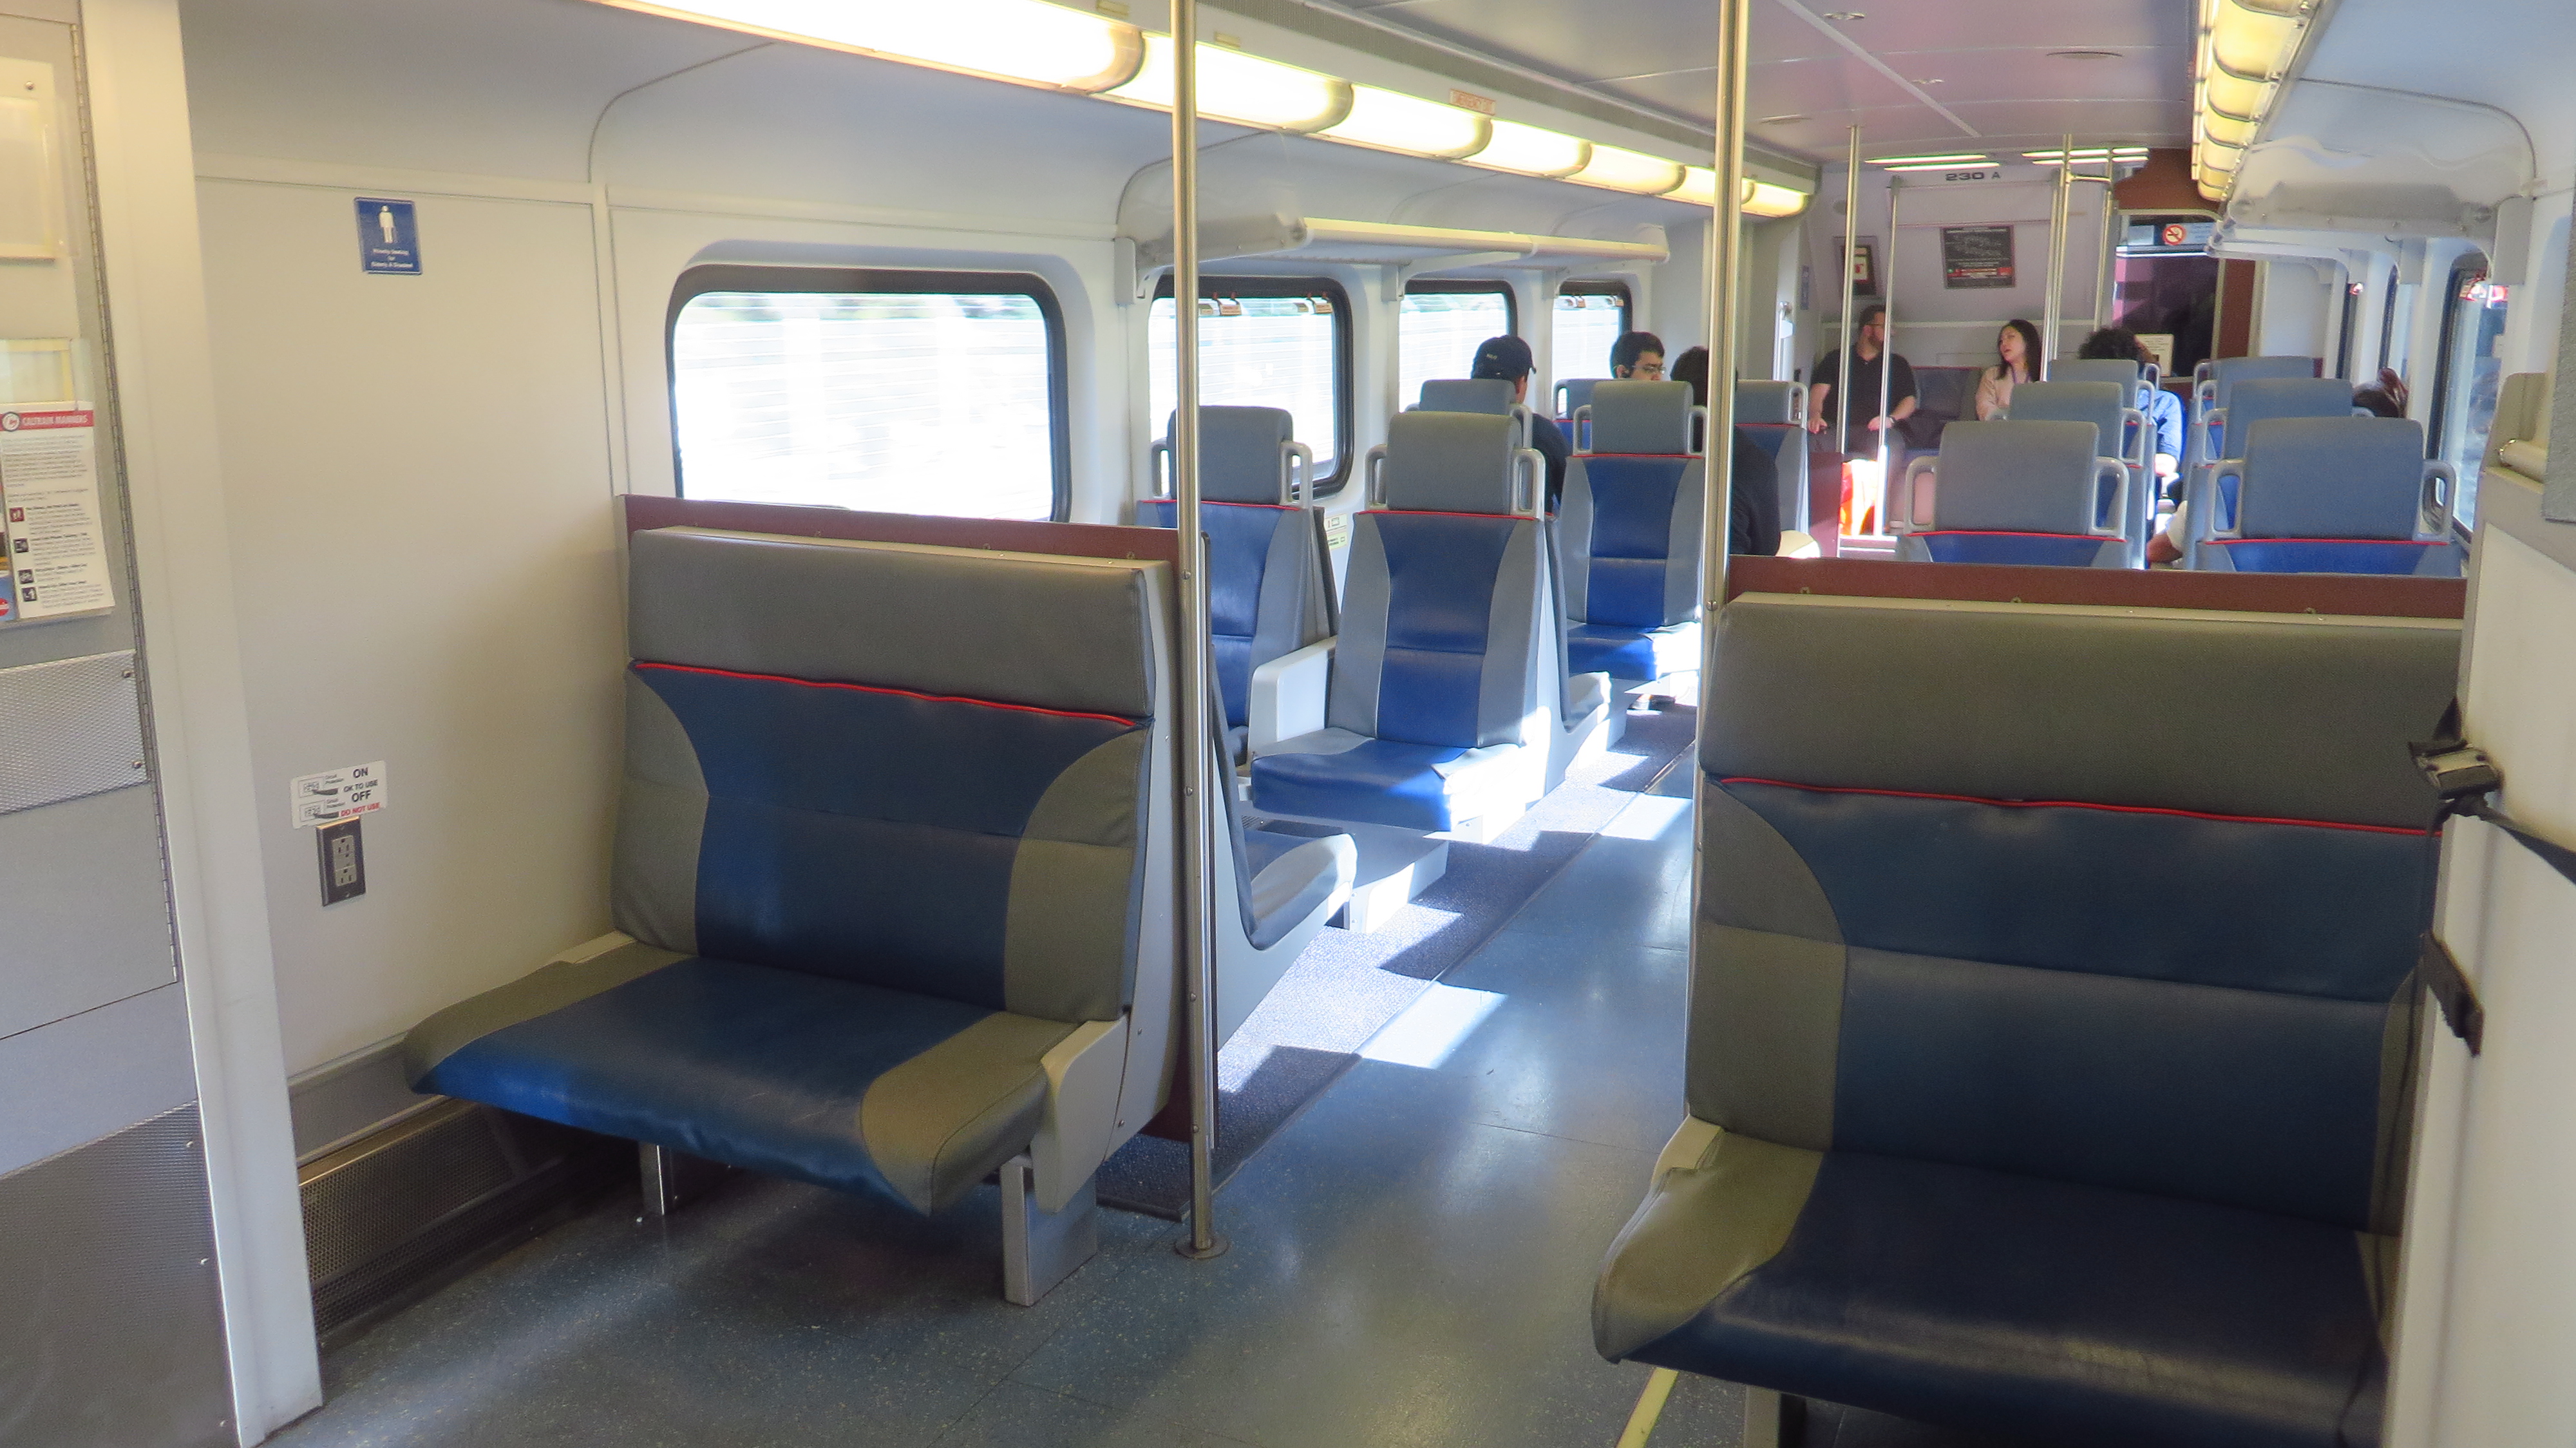 A view of the lower floor of a Bombardier Bilevel passenger car